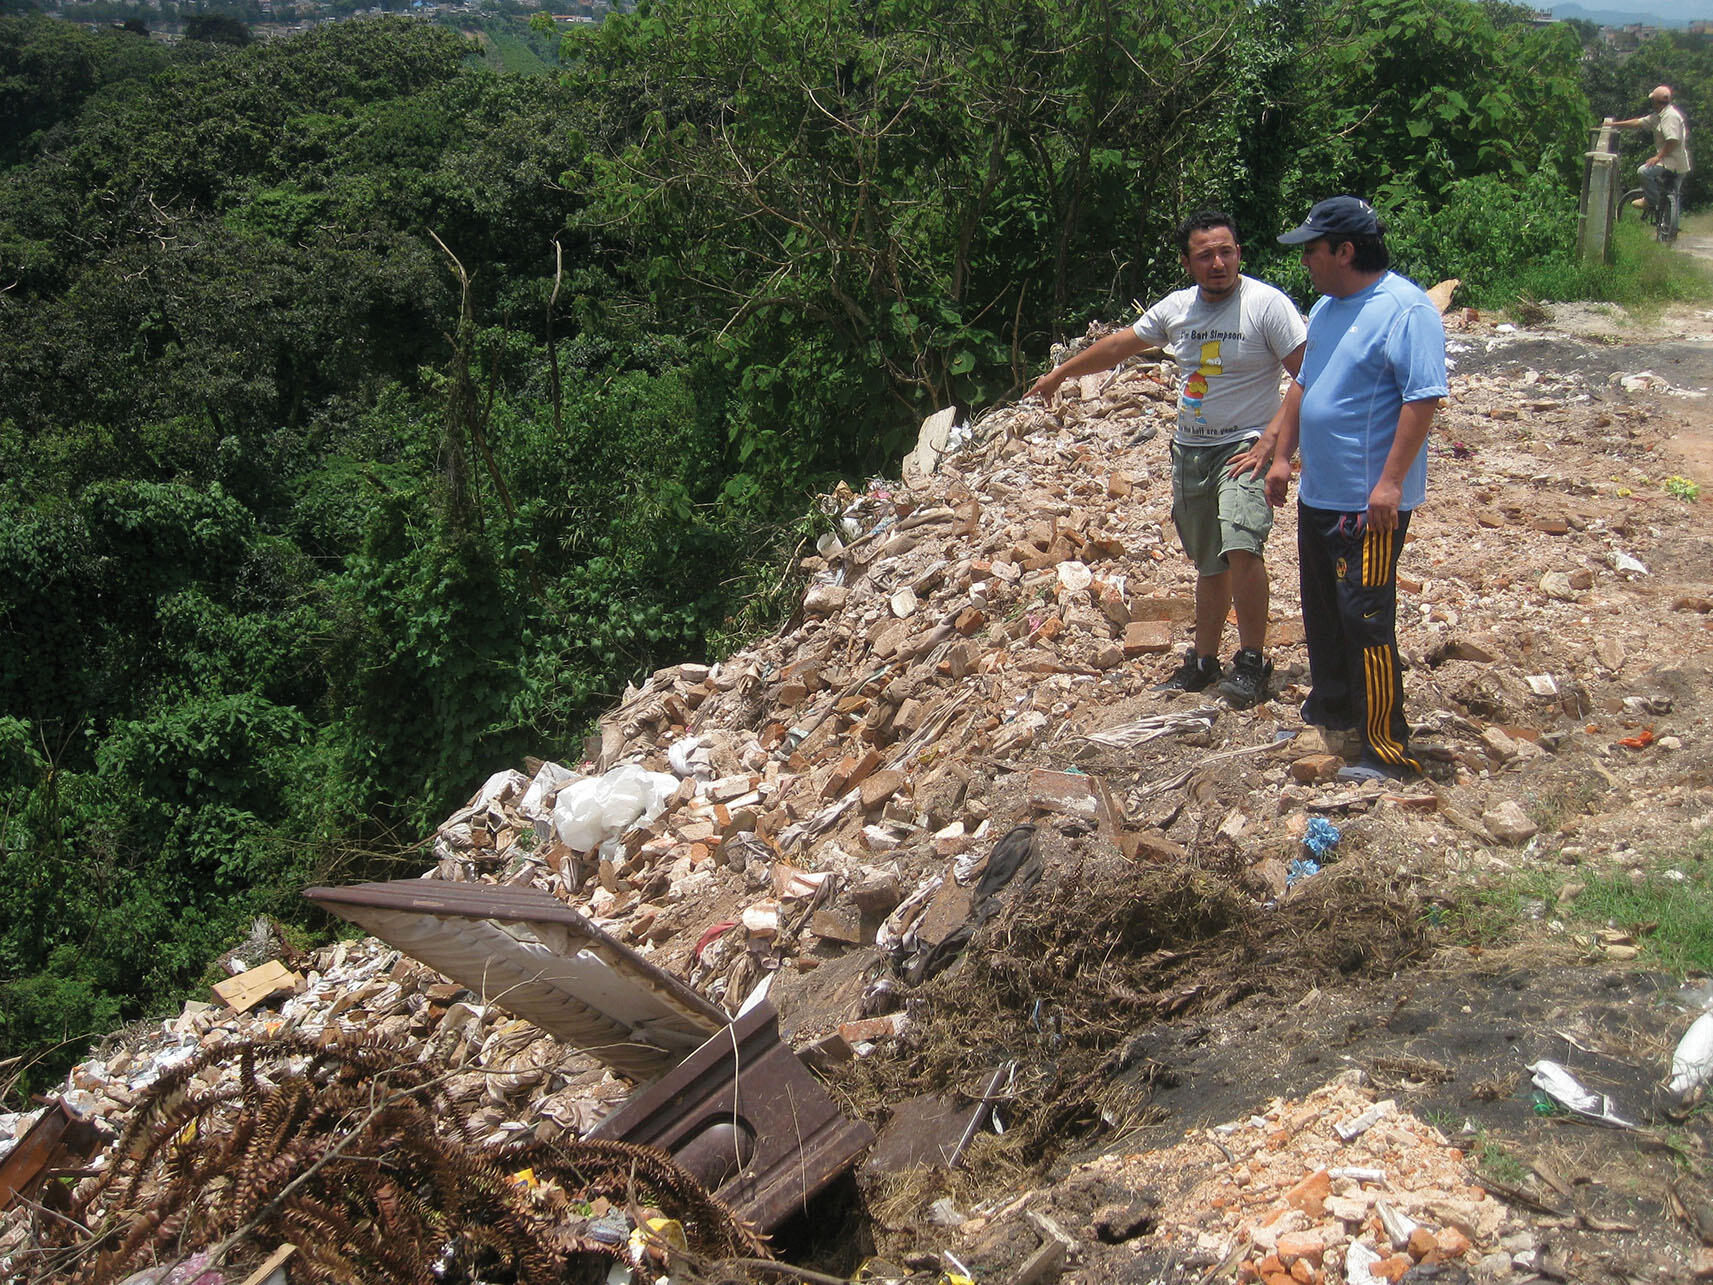 Juan and Guillermo stand at the border between the cemetery and the dump, where excess bodies are sometimes rolled down the hill from one to the other. (Photo by Anthony Fontes.)